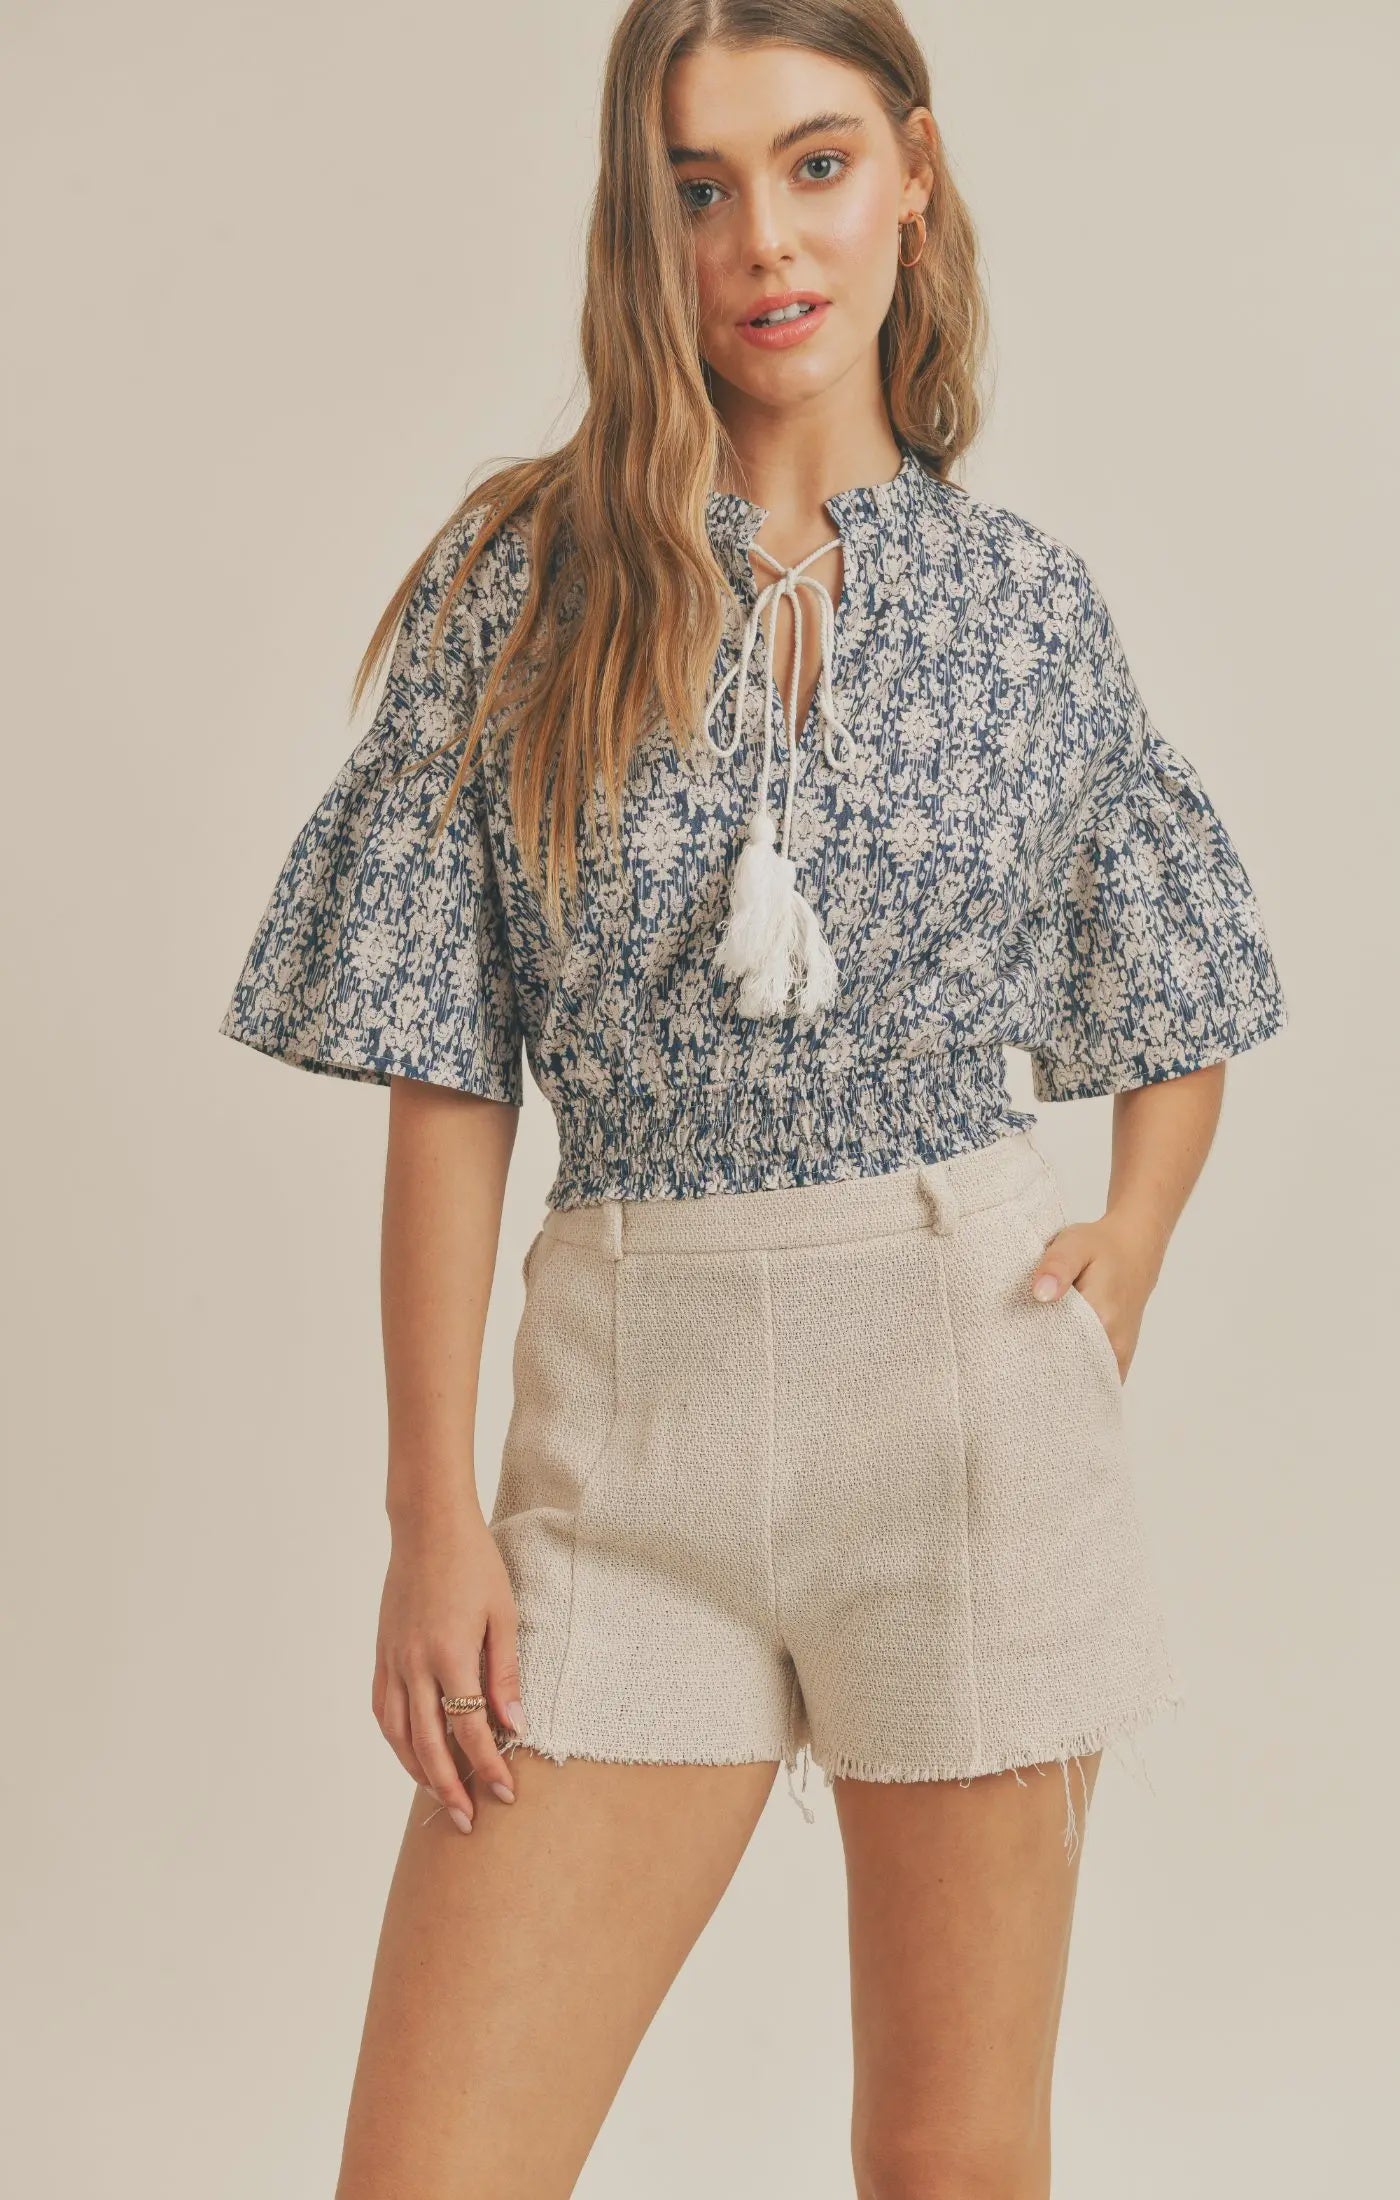 The Walk With Me Tassle Blouse